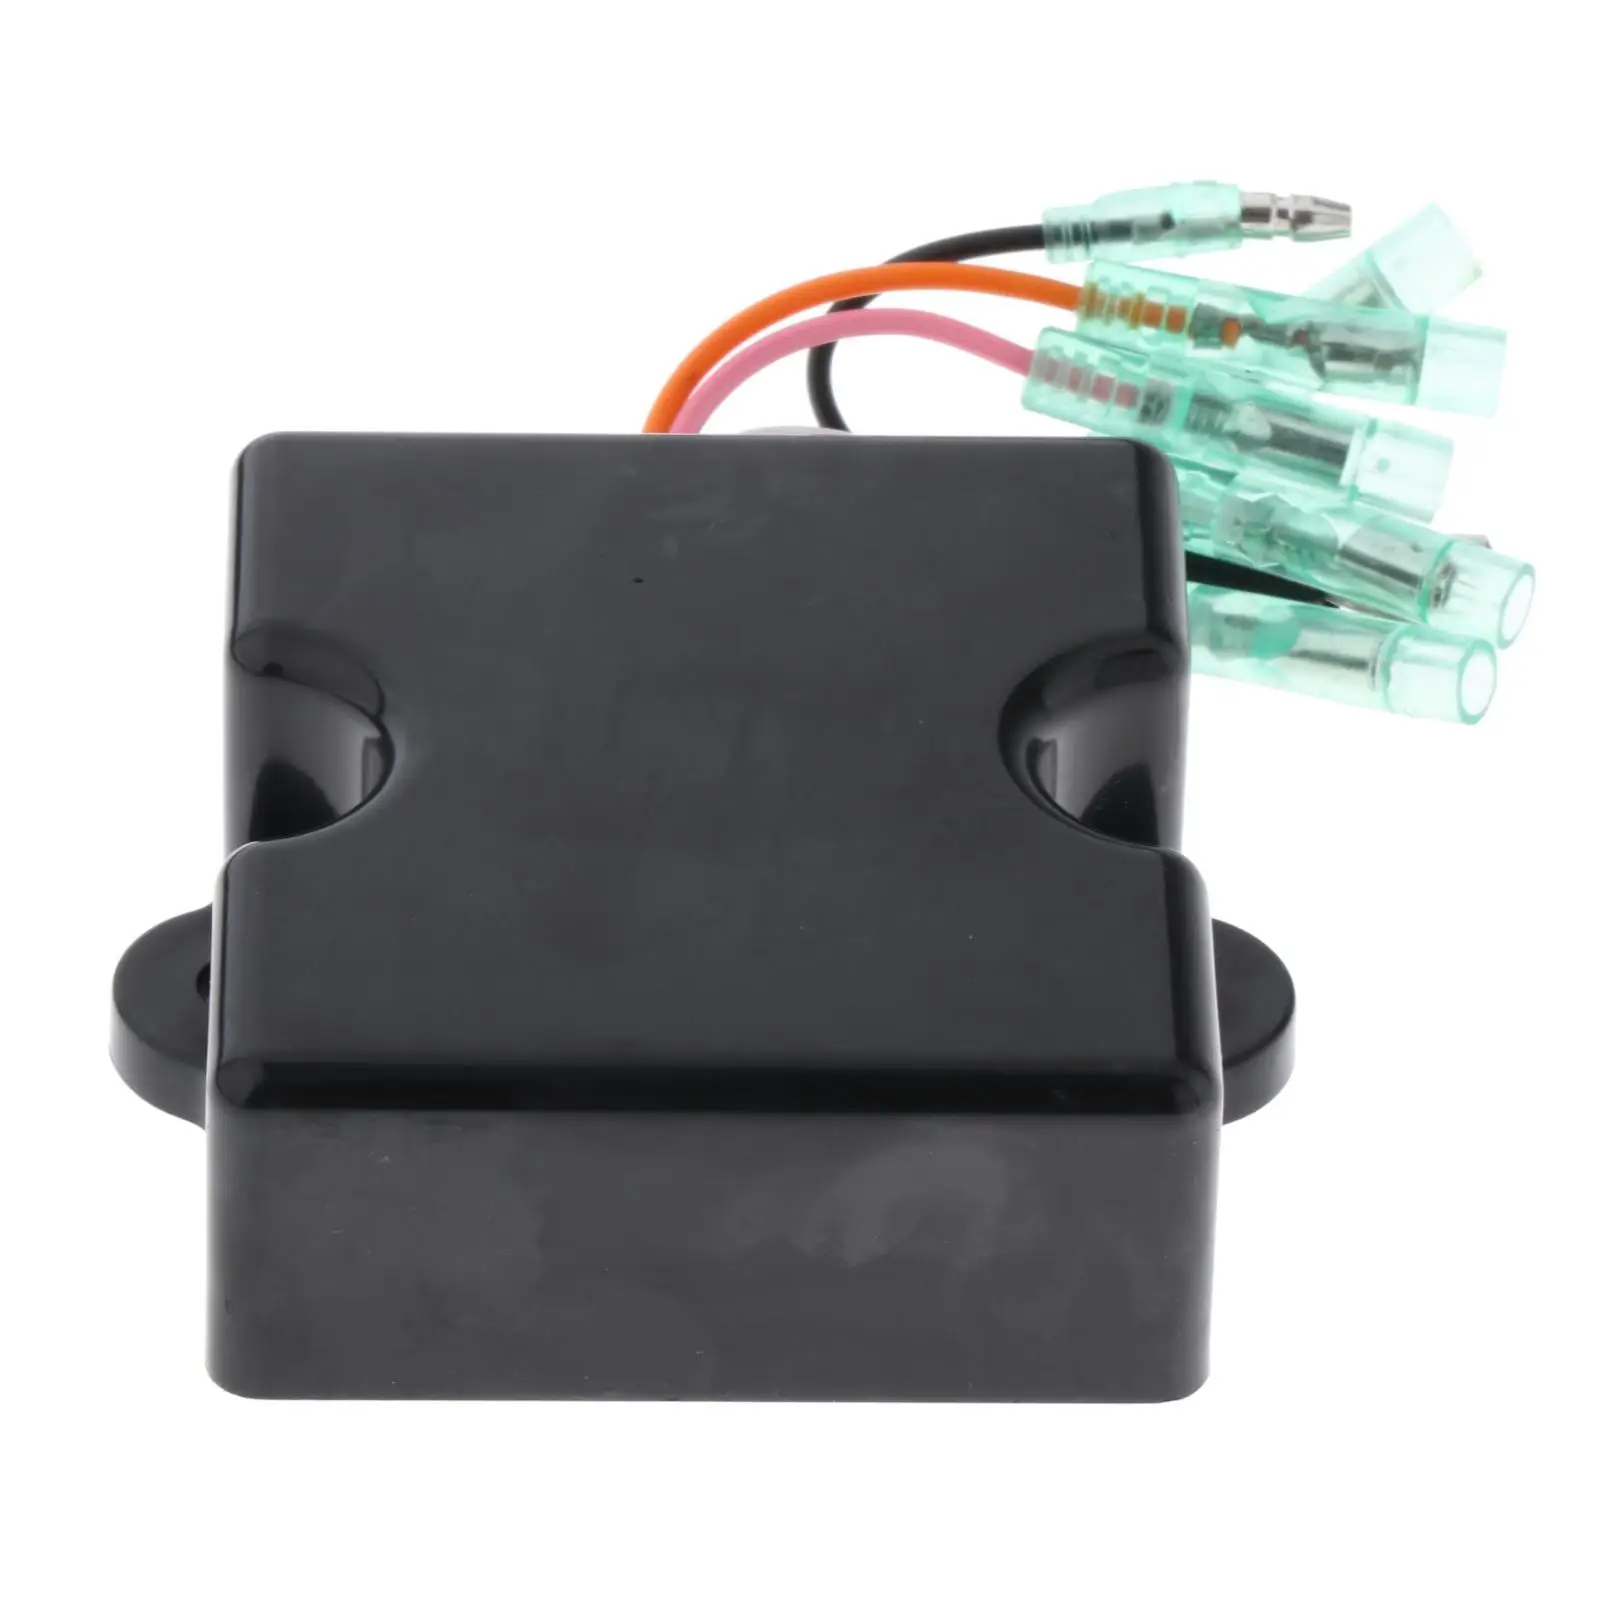 Cdi Igniter Module Replacement for Yamaha Superjet Wave Wave Blaster